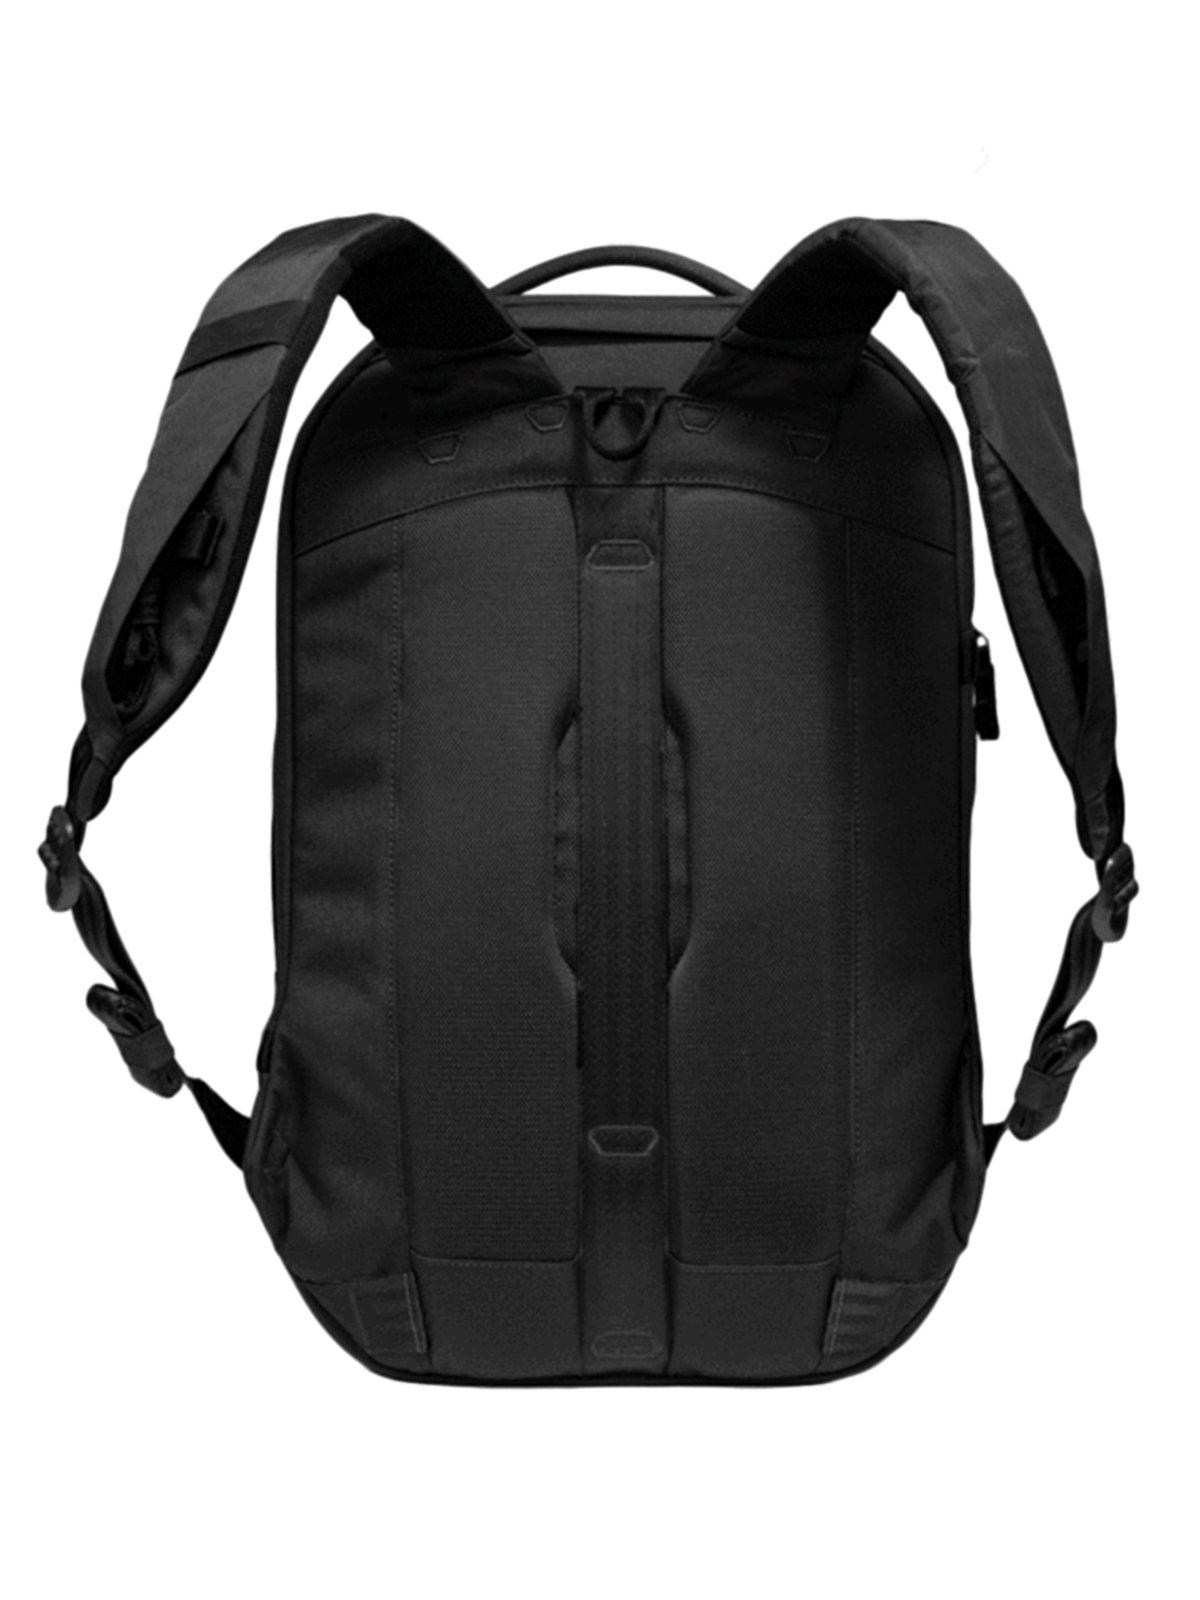 Able Carry Max Backpack Dark Tarmac Black